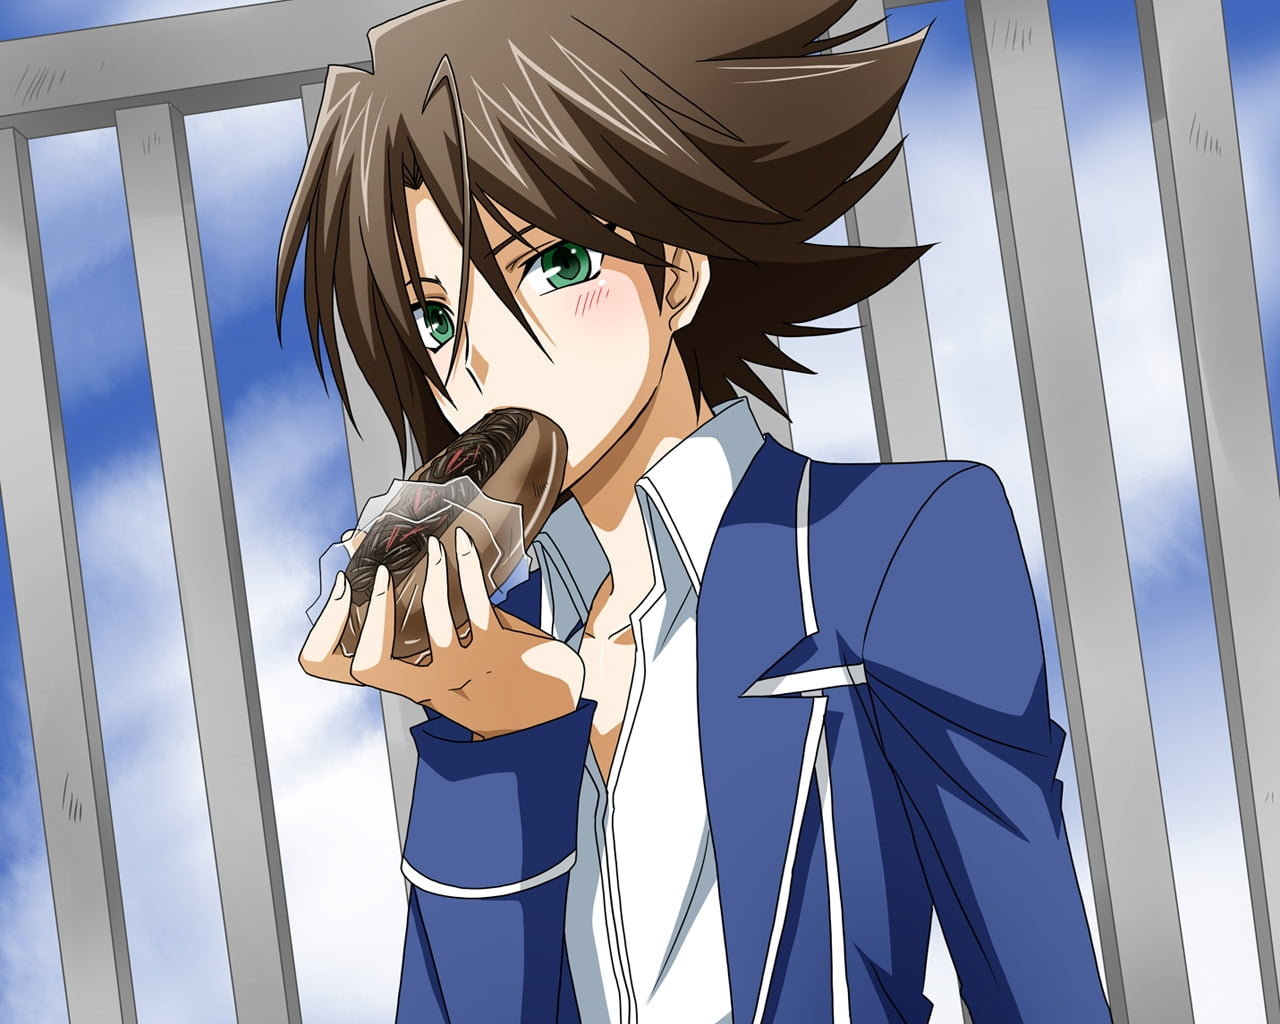 man with brown hair and wearing blue suit anime illustration